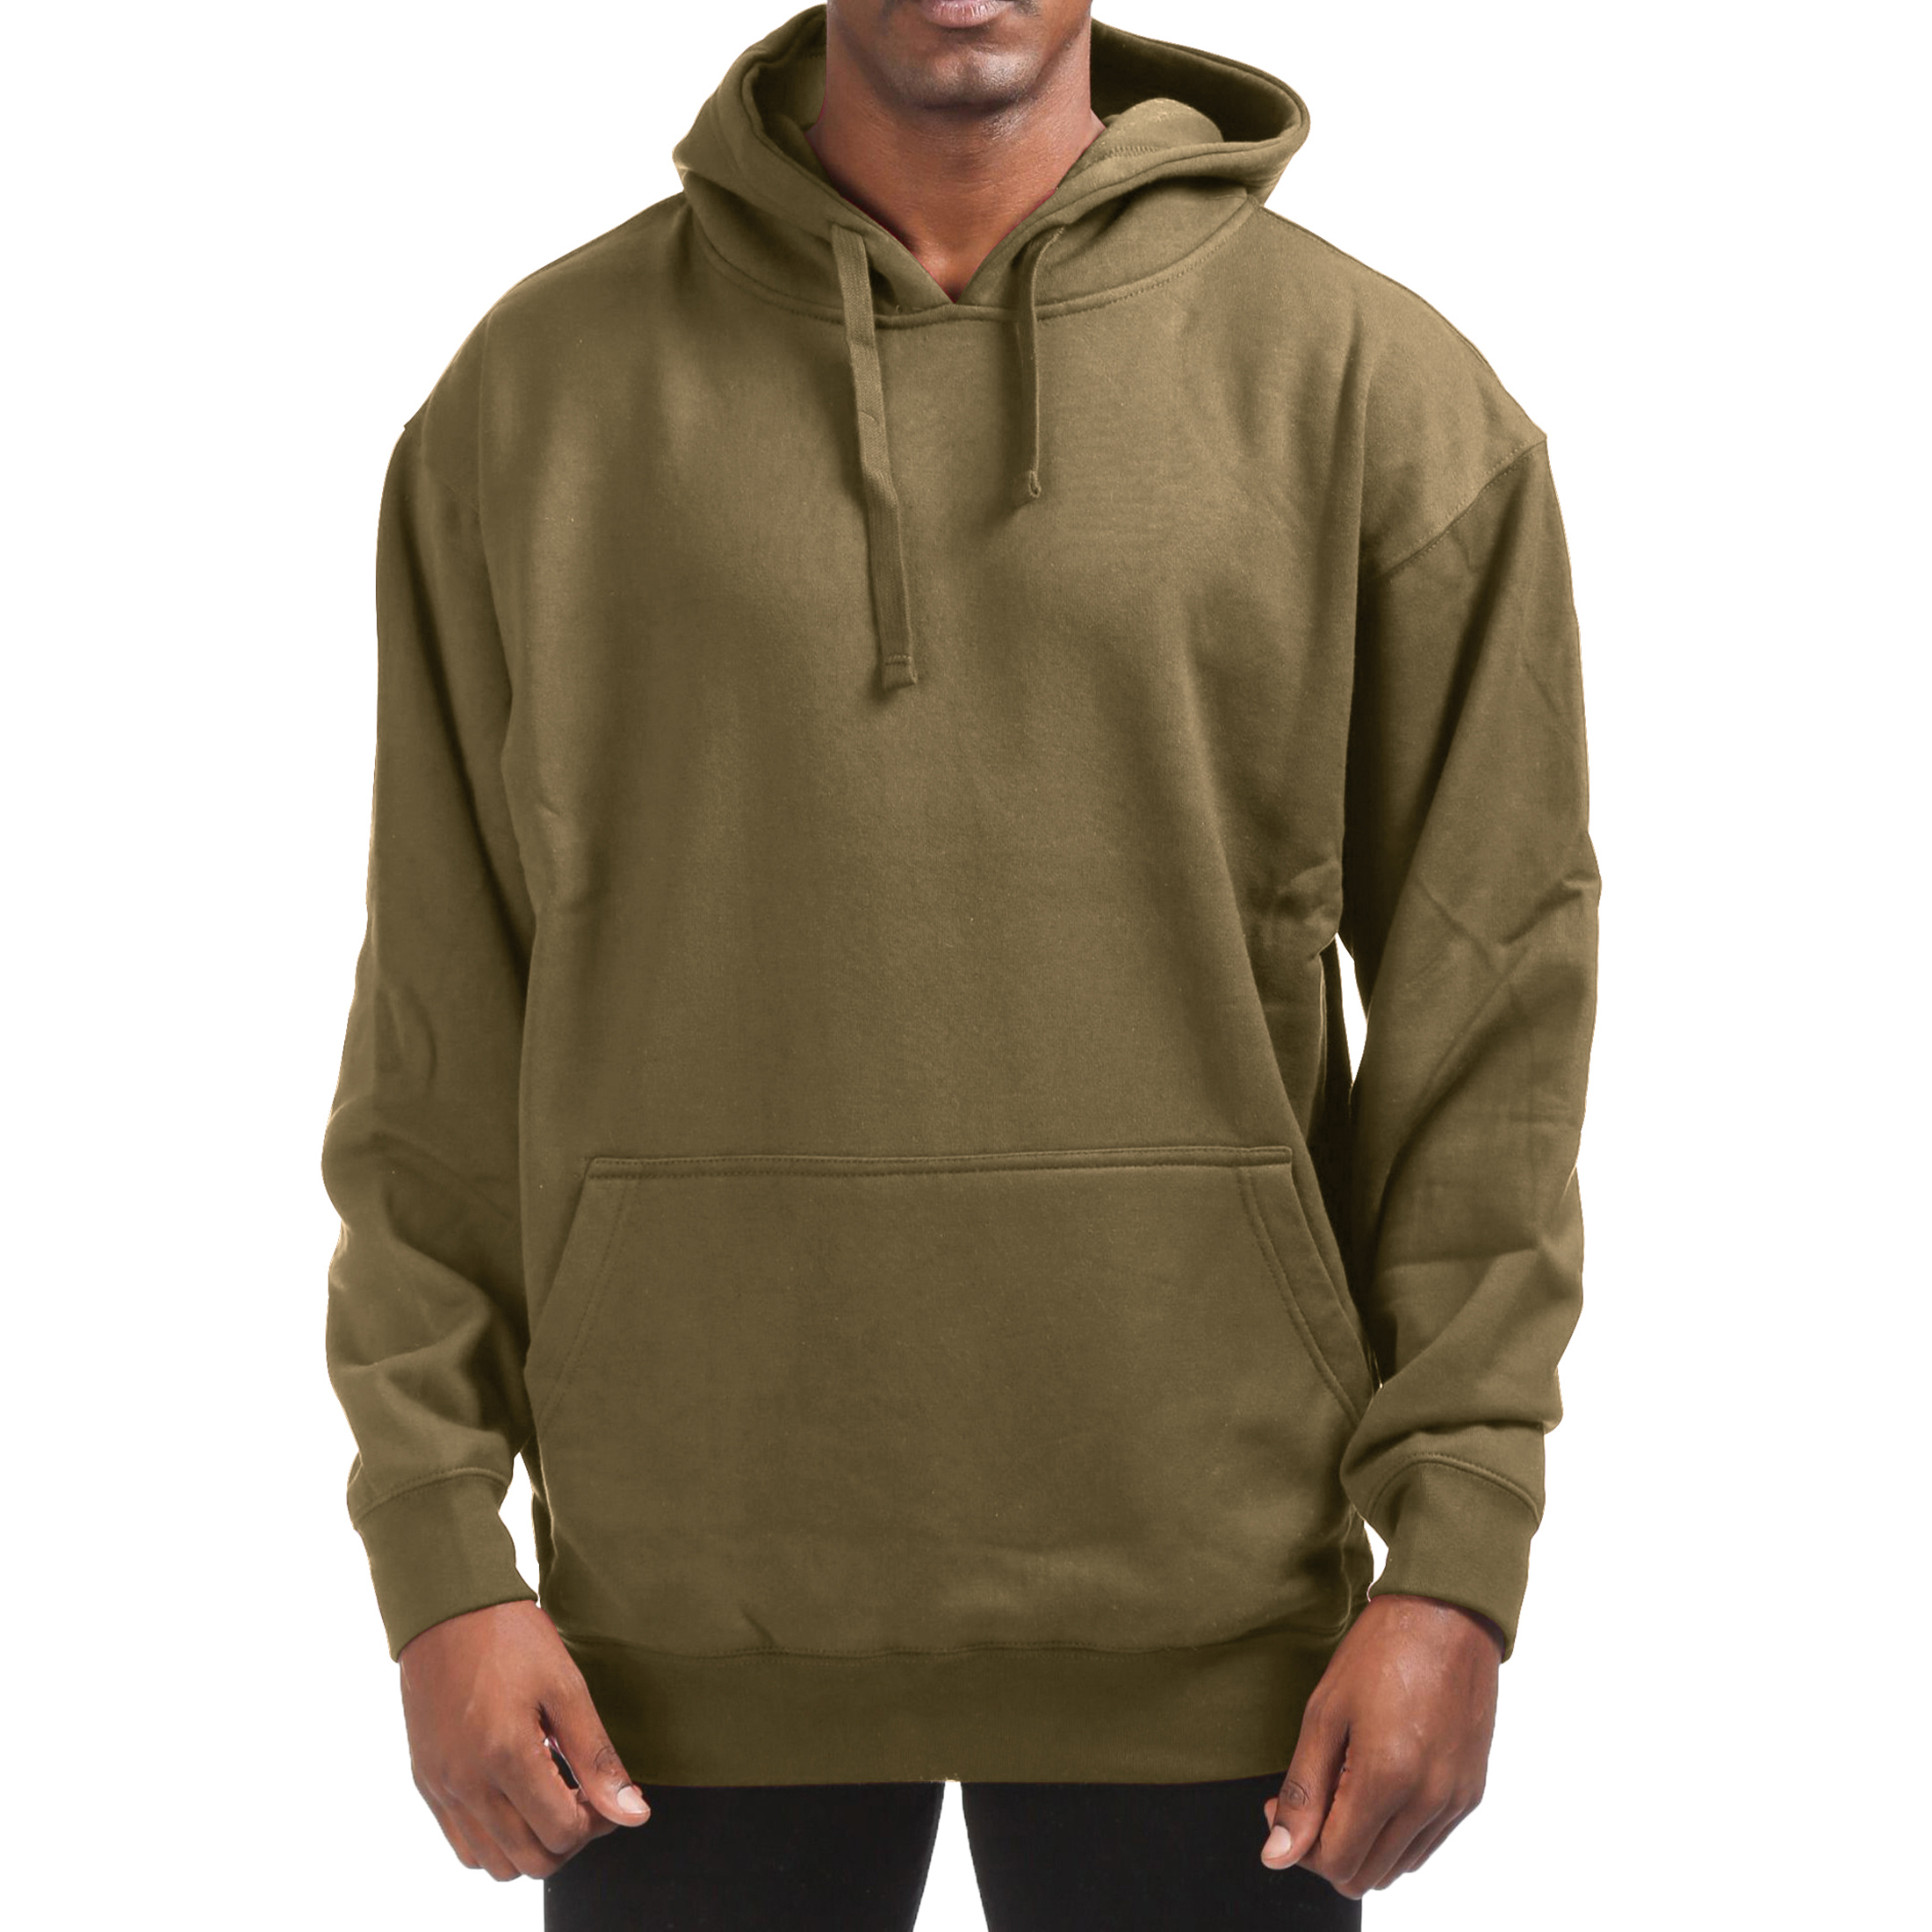 Men's Cotton-Blend Fleece Pullover Hoodie With Pocket (Big & Tall Sizes Available) - Olive, 4X-Large